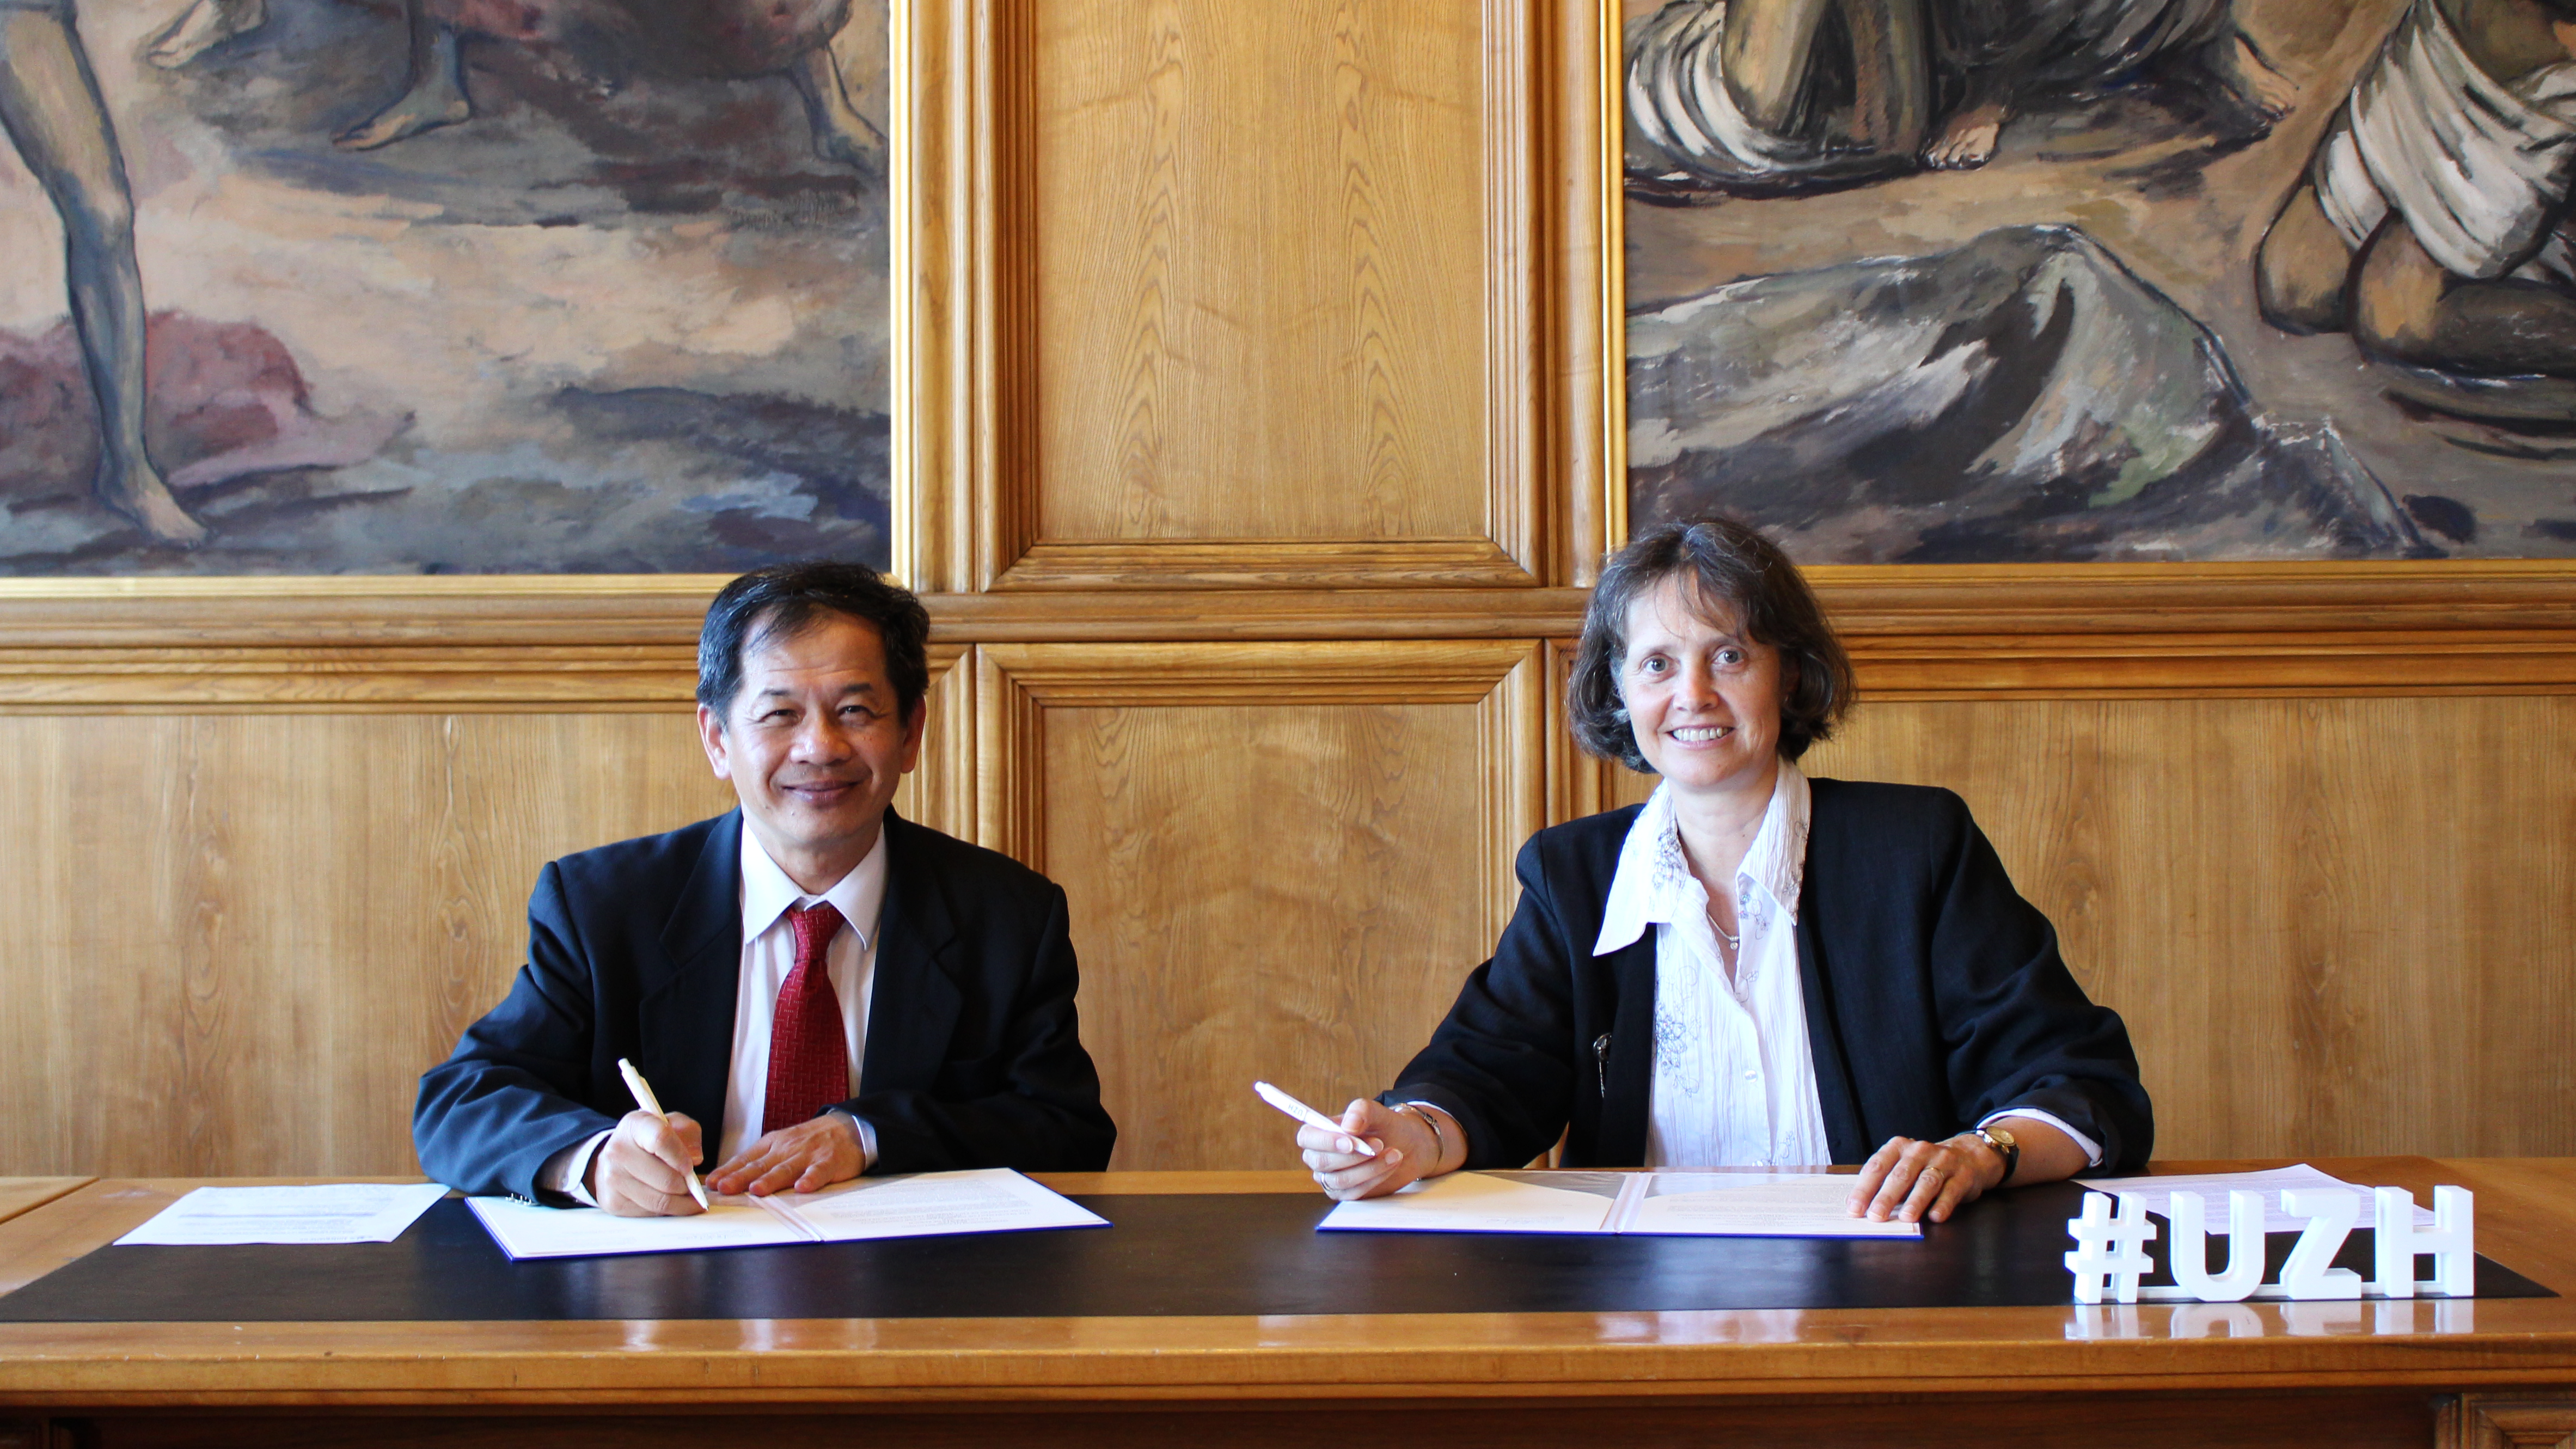 Photo of Professor Huang, Representative of the Delegation culturally et économique de Taipei in Bern, and Professor Katharina Michaelowa, Dean of the Faculty of Arts and Social Sciences